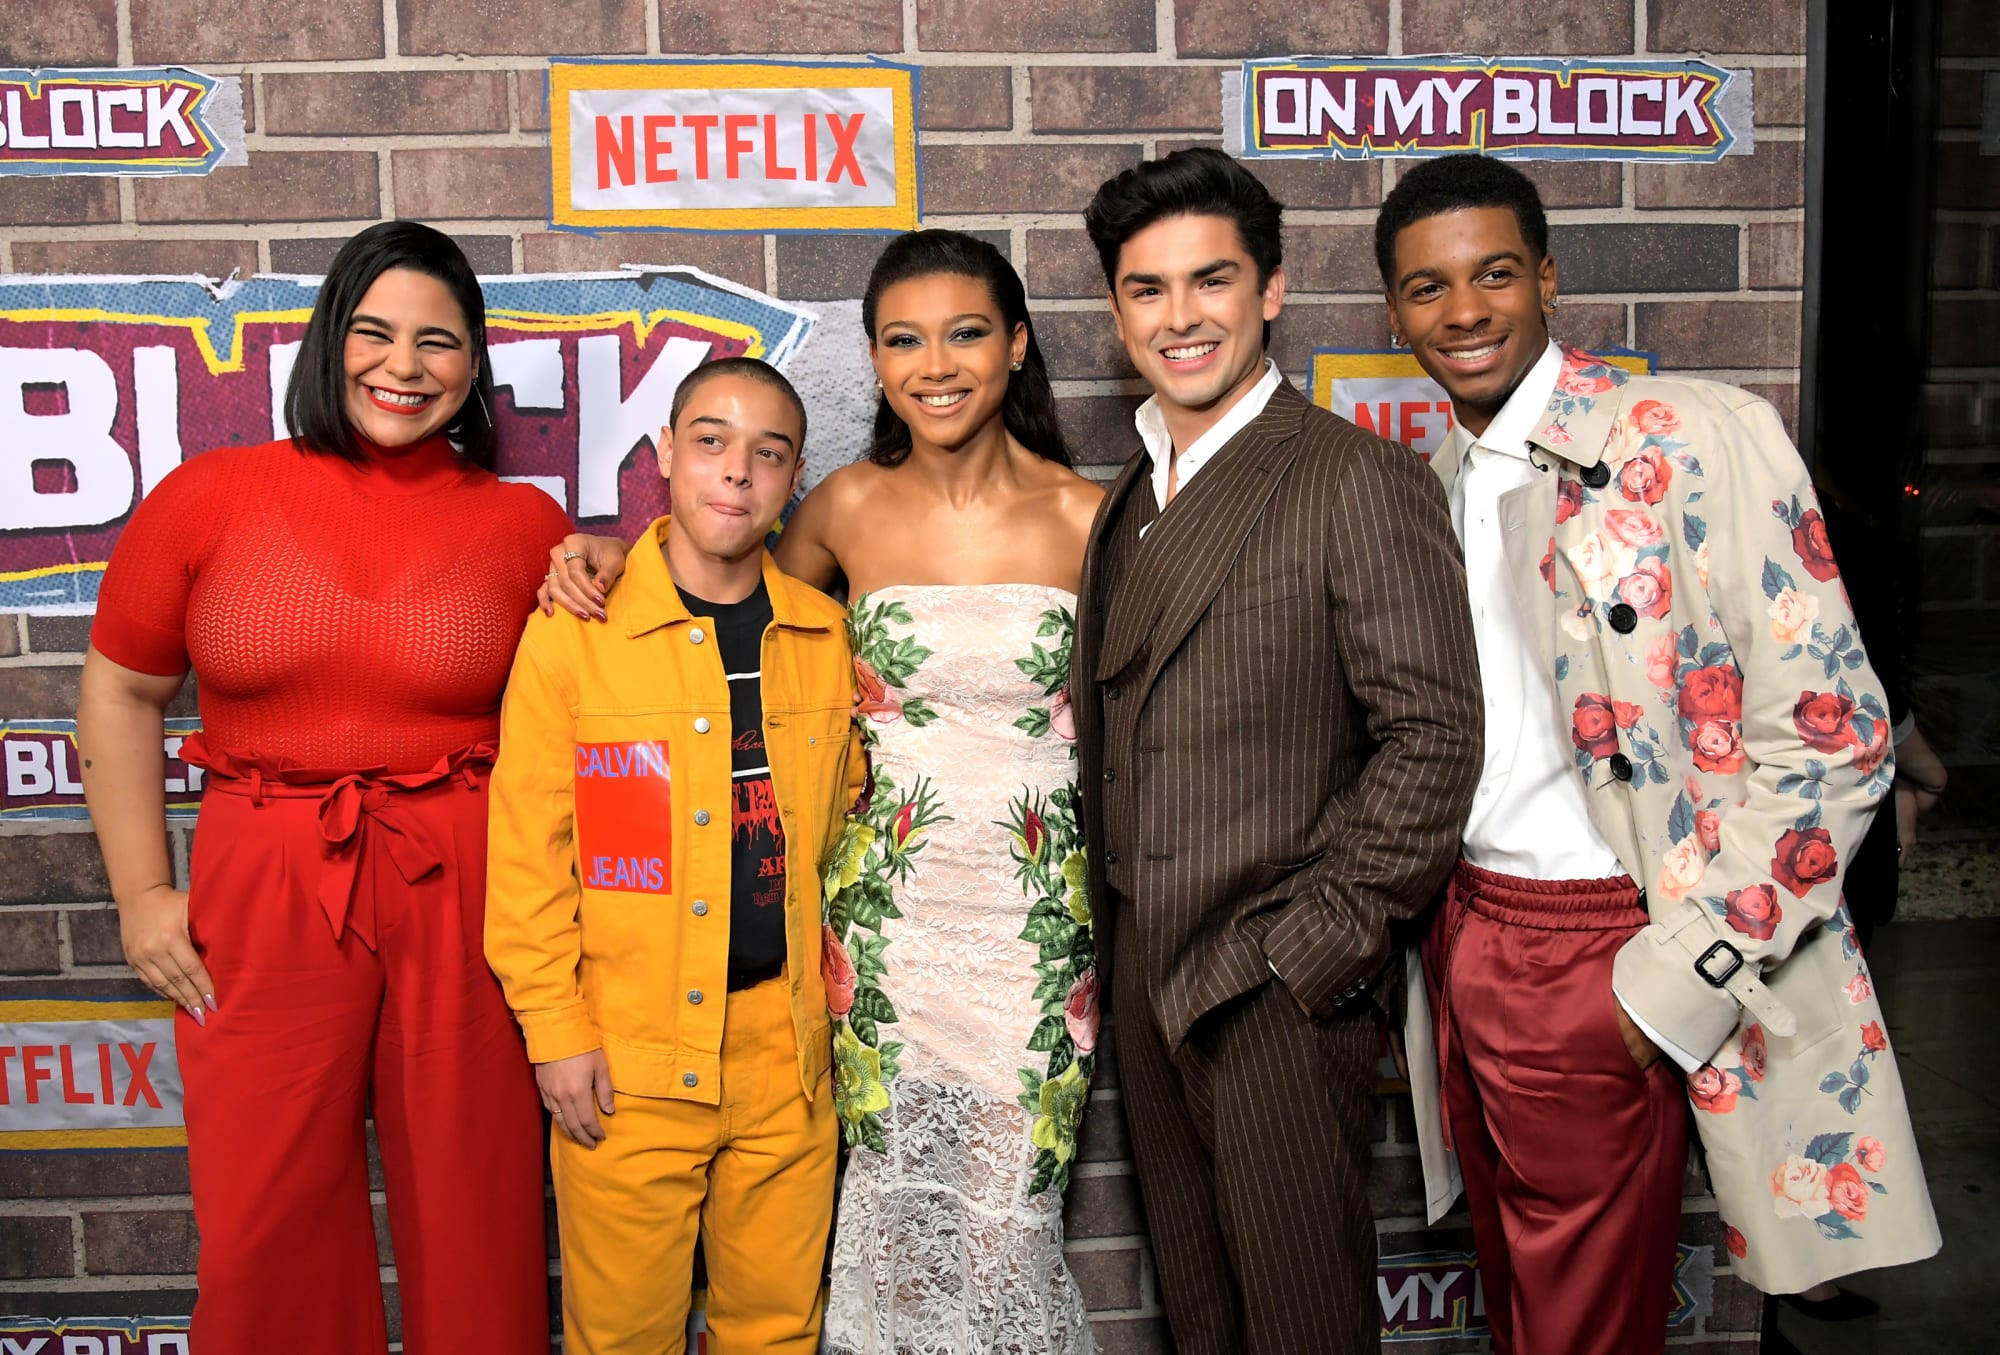 On My Block cast ages How old are the actors in real life?